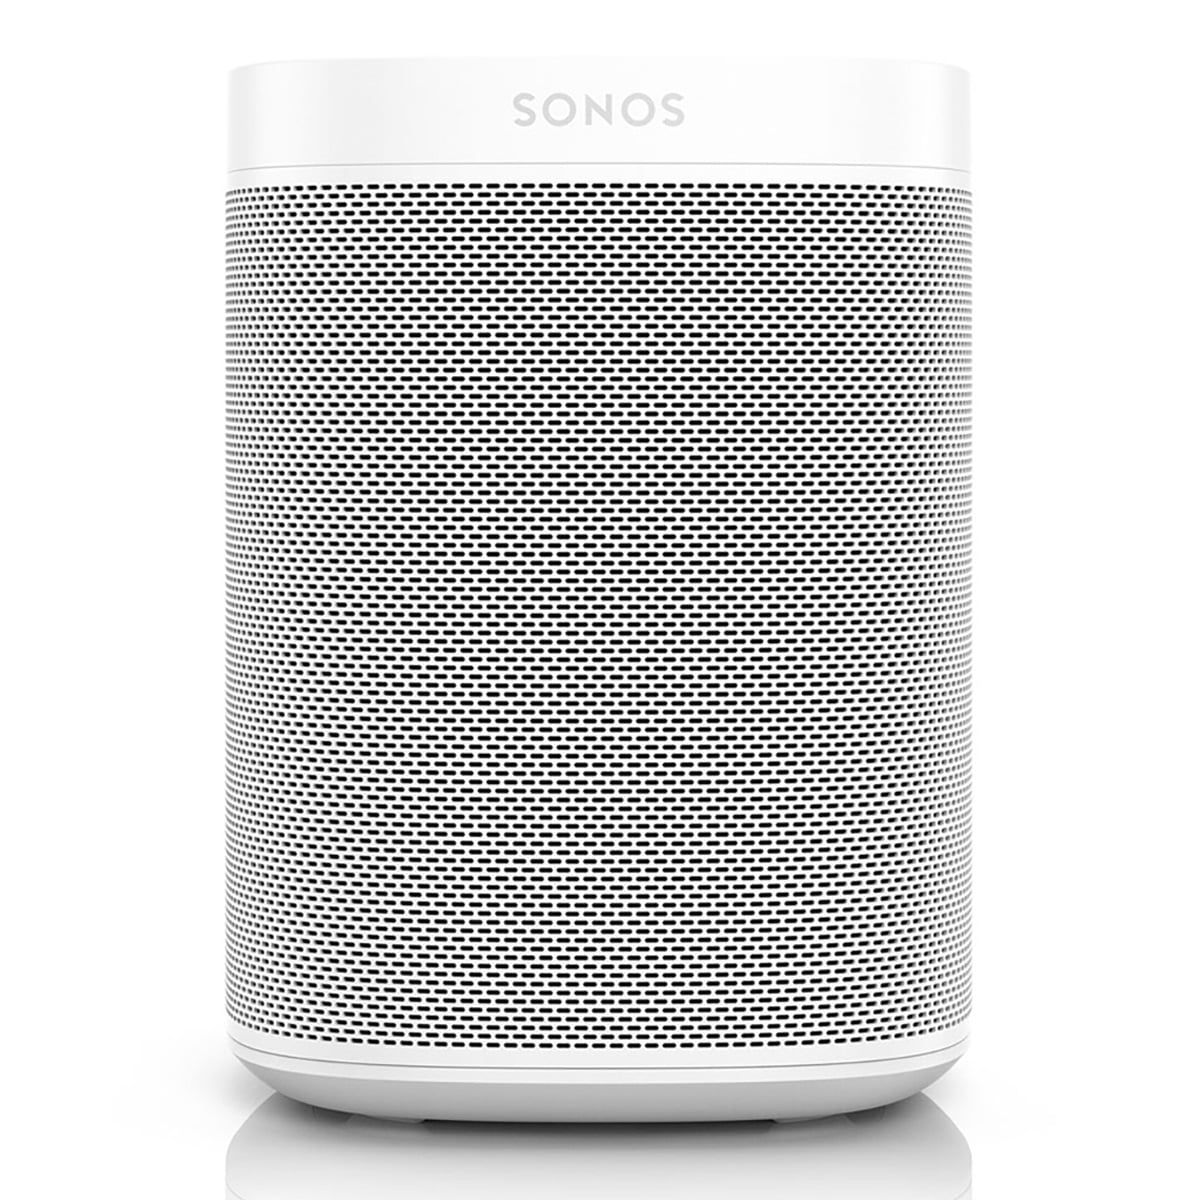 offiziell Sonos Two Room Sonos 2 Control Gen One with Voice Built-In(Black) Speaker Smart Set - with